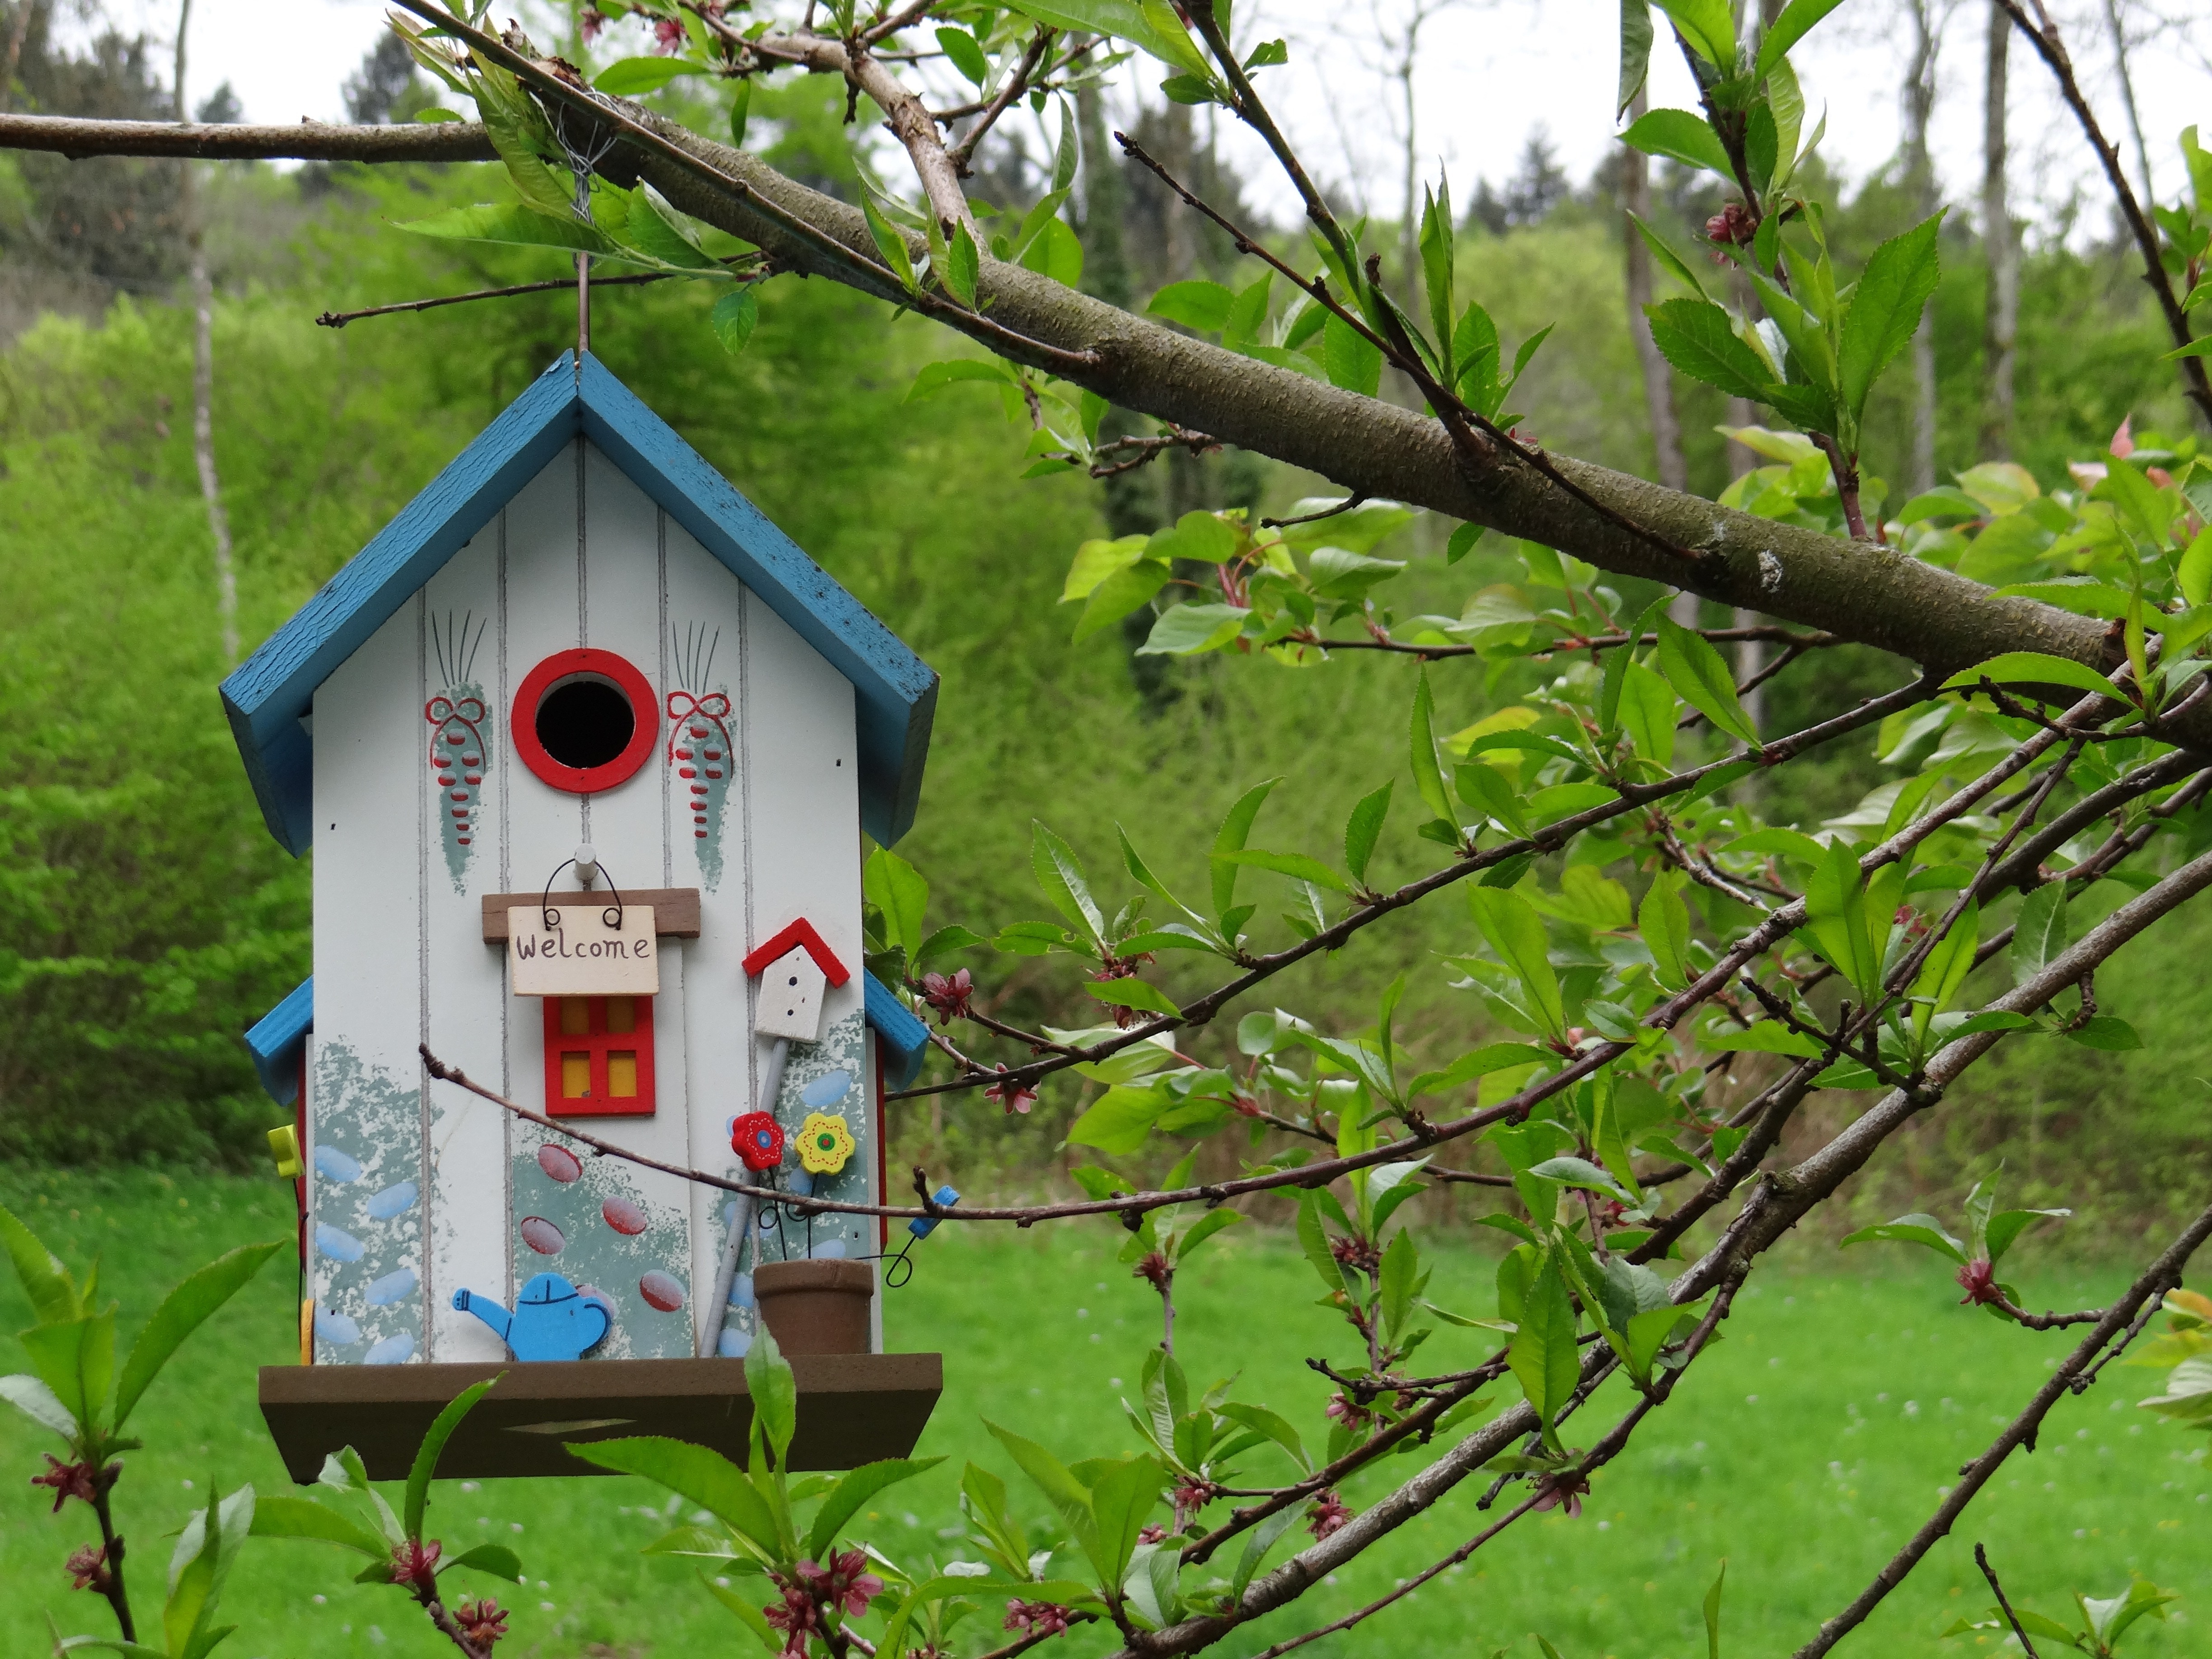 blue, white, and brown wooden bird house hanging on a tree branch